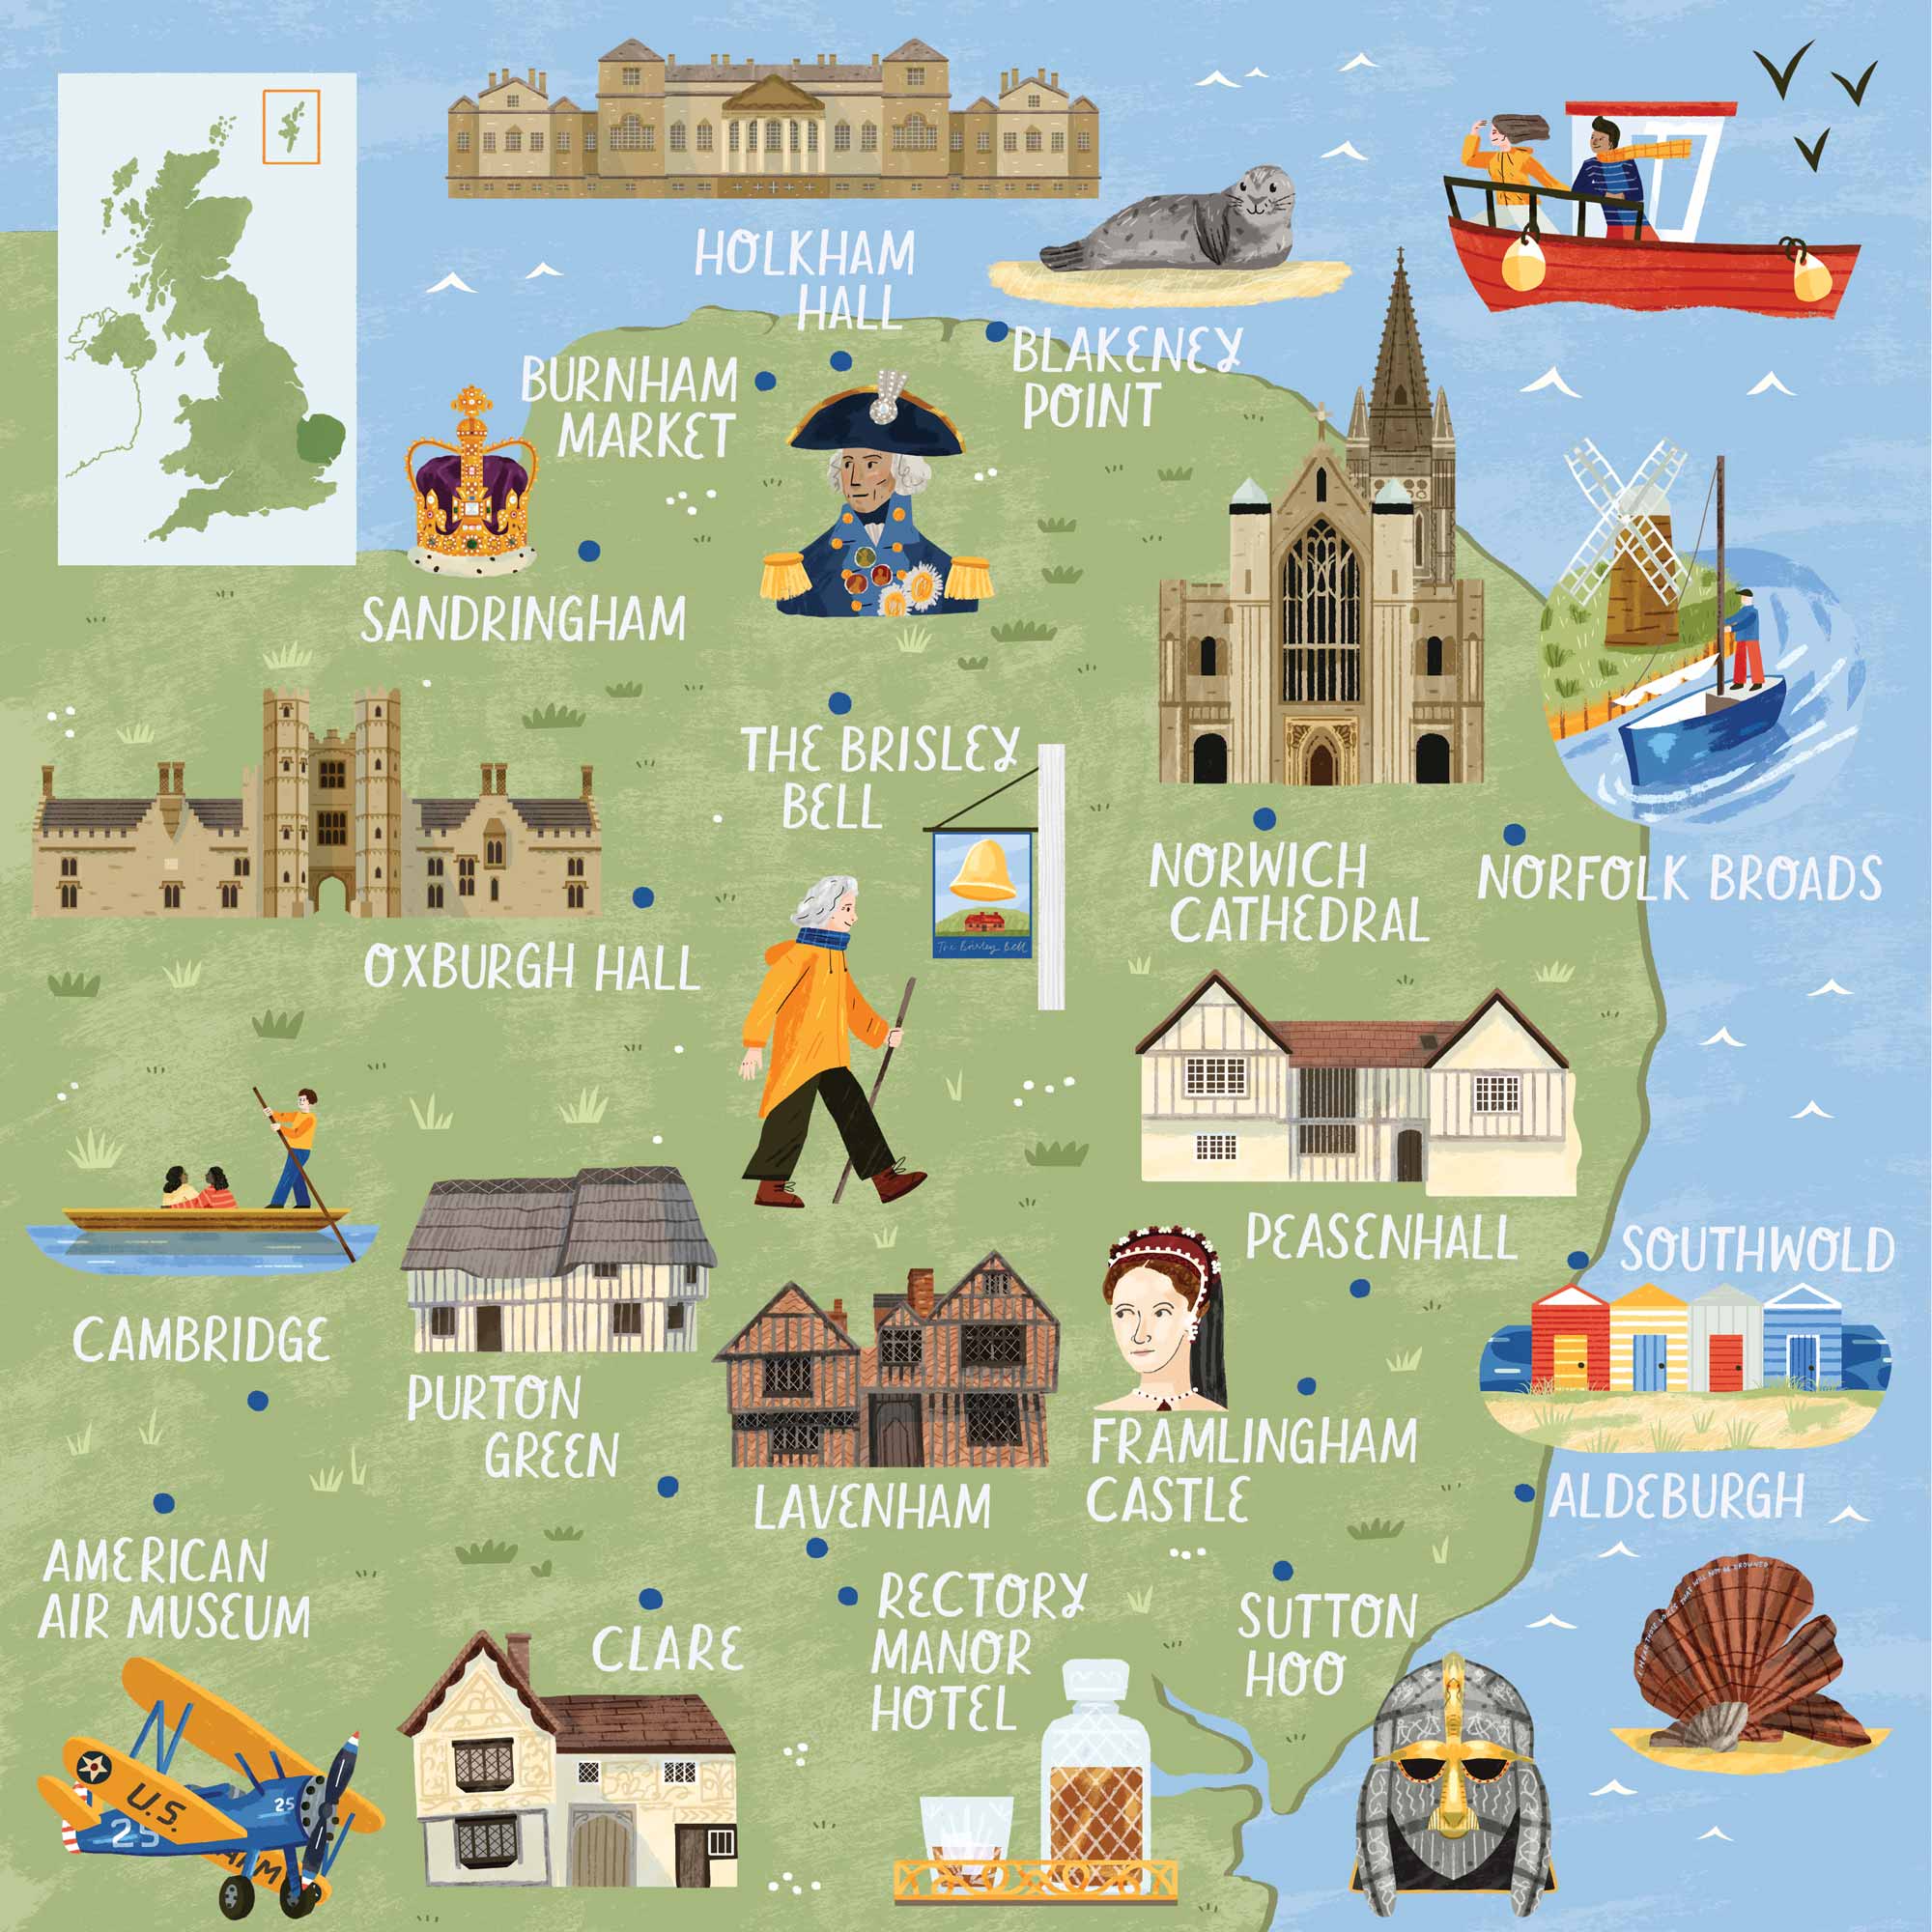 A map of the eastern part of England for Discover Britain magazine by Elly Jahnz